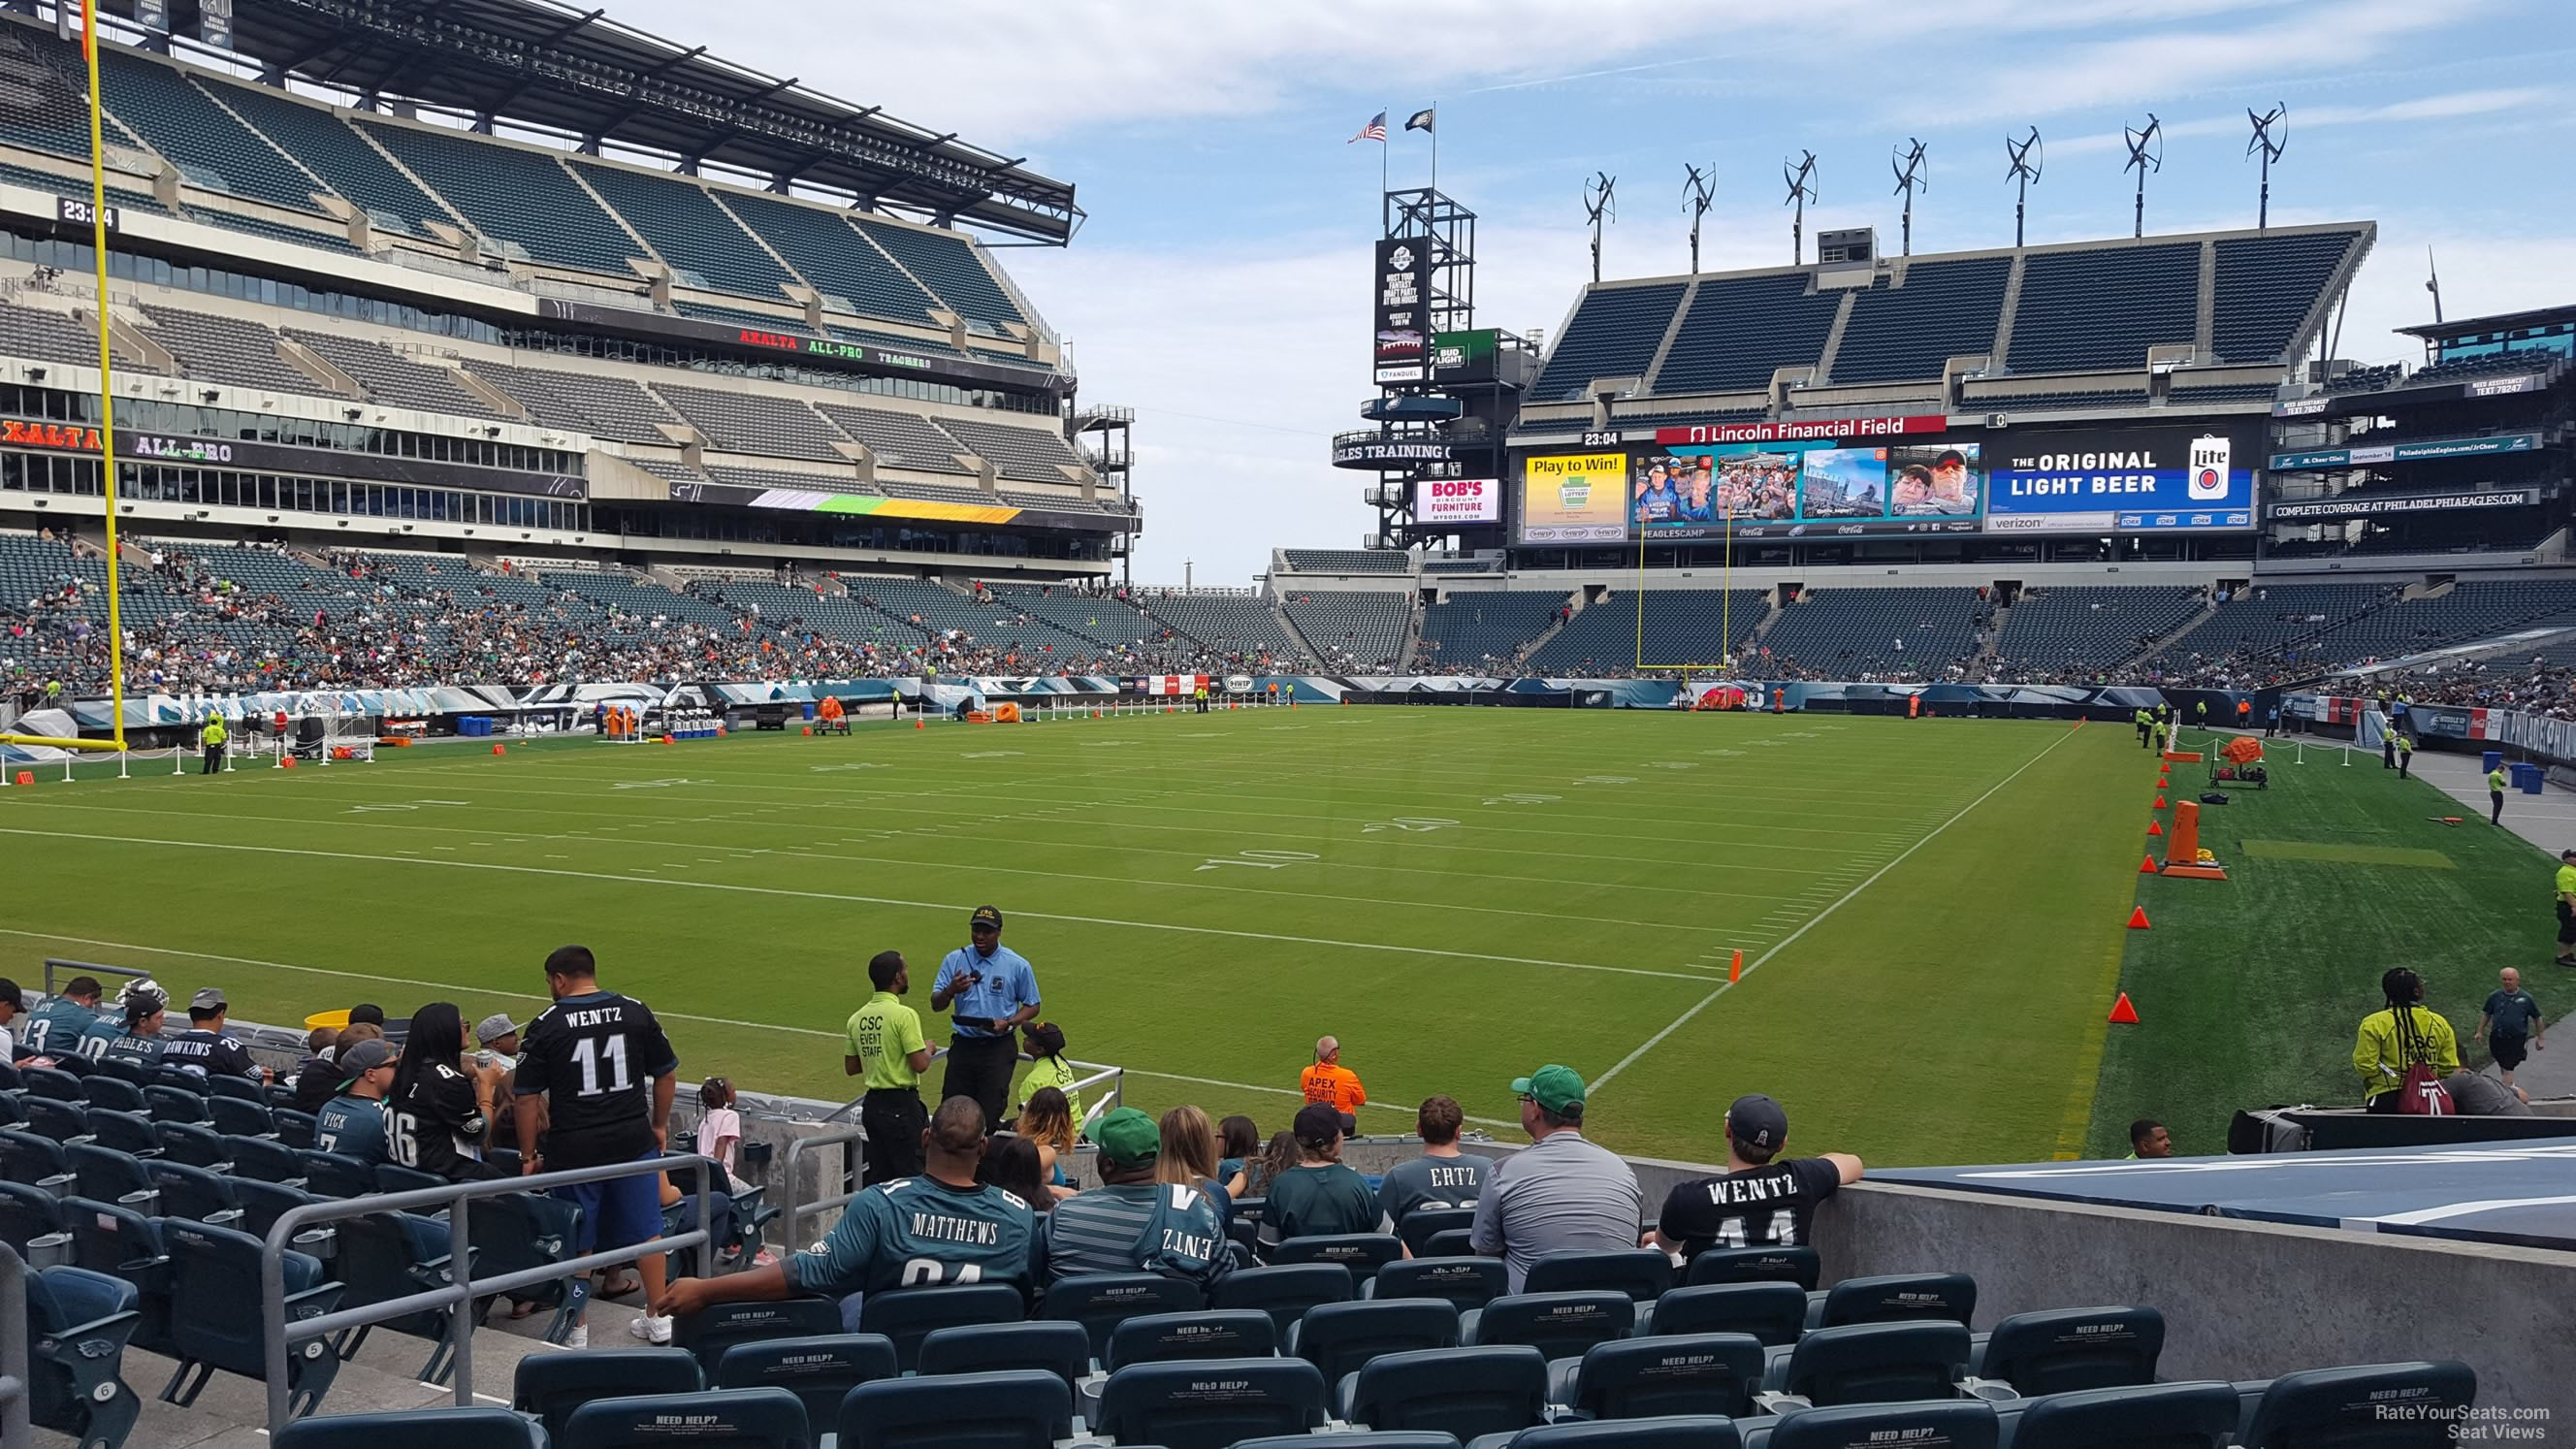 section 113, row 12 seat view  for football - lincoln financial field